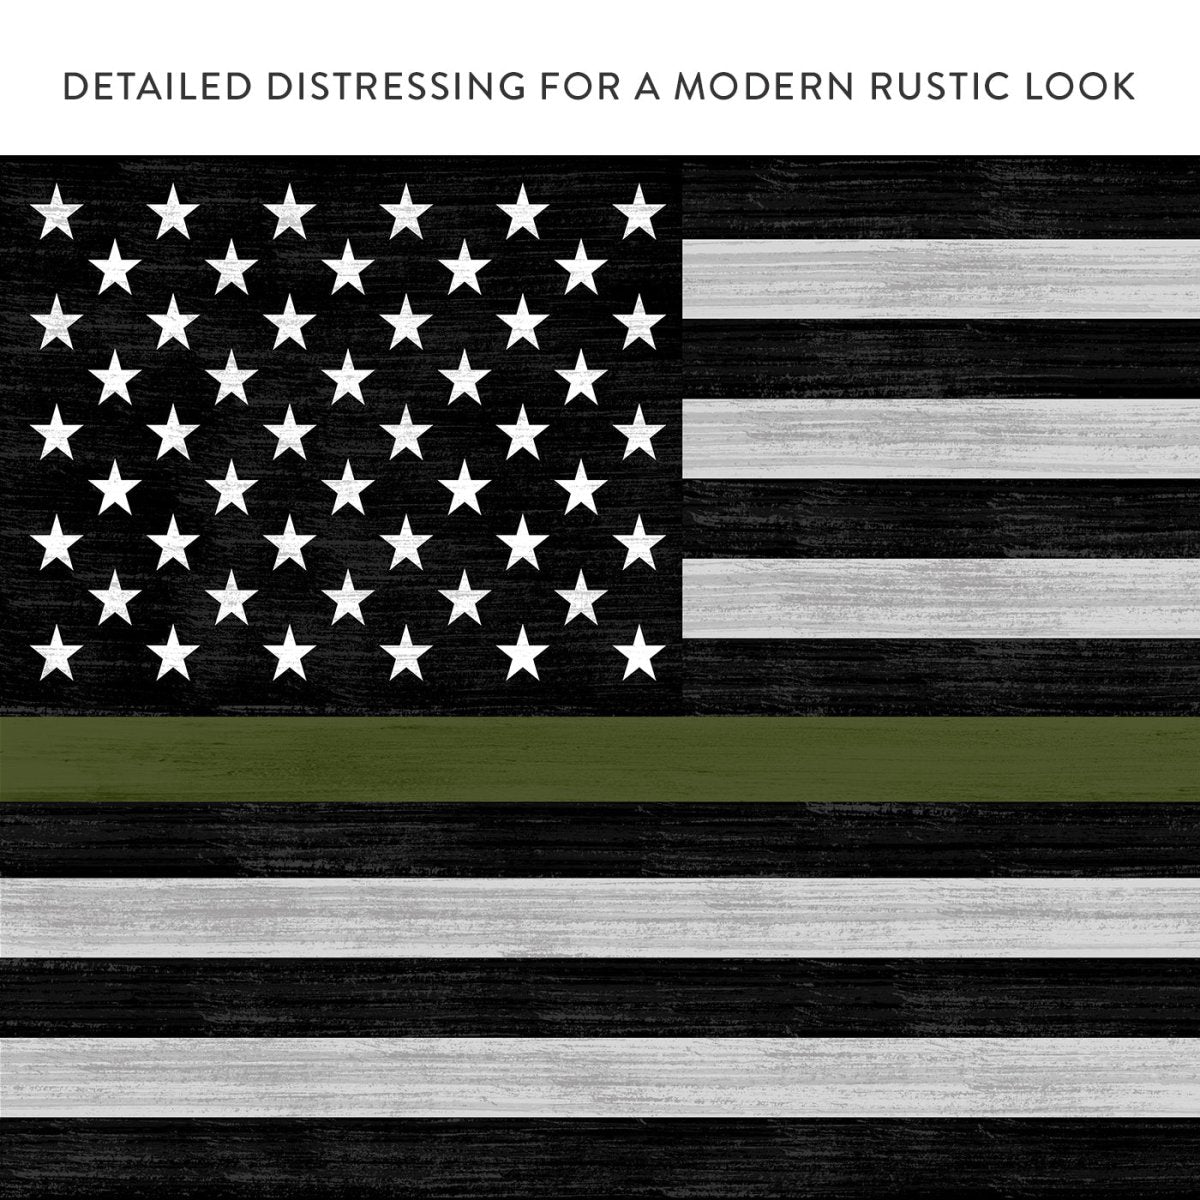 Green Line American Flag Military Sign With Distressed Modern Look - Pretty Perfect Studio